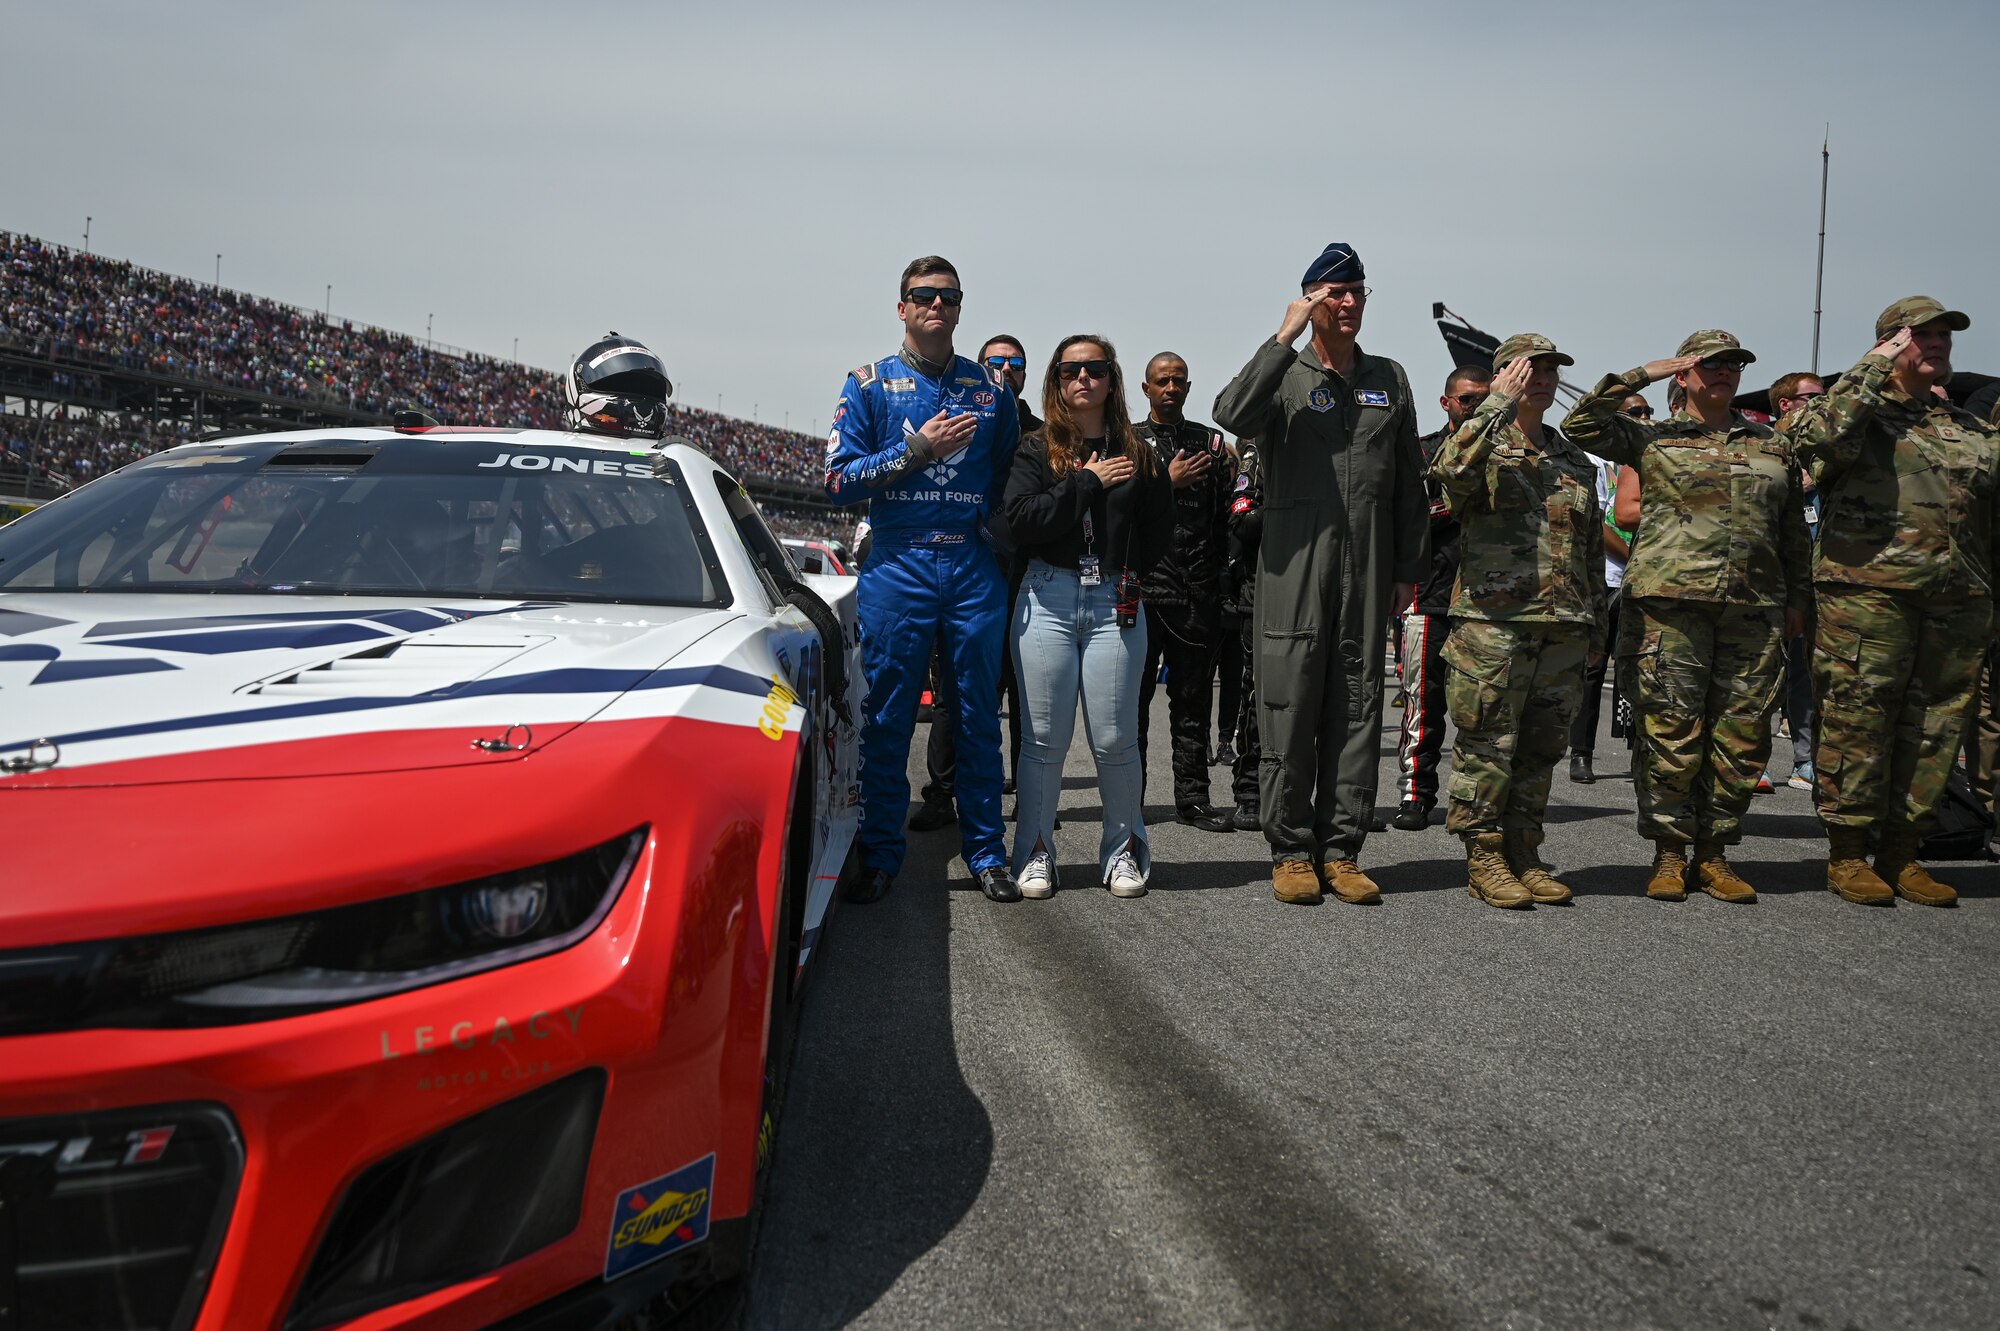 Photo of Erik Jones participating in the national anthem with Air Force Reserve leadership.